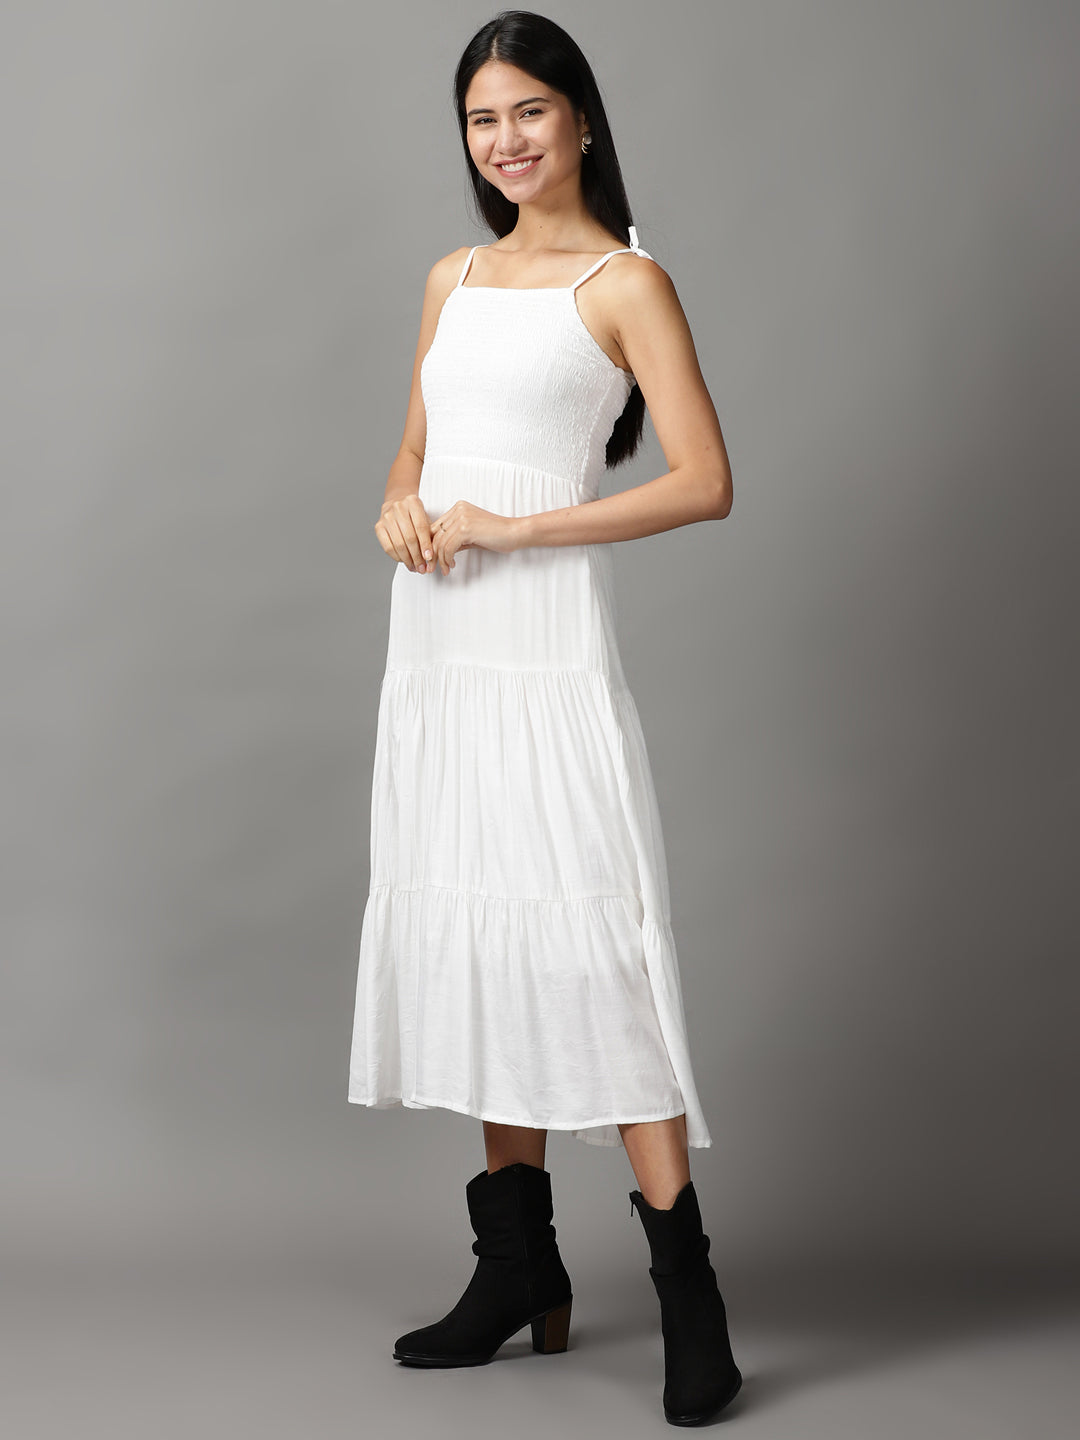 Women's White Solid Fit and Flare Dress